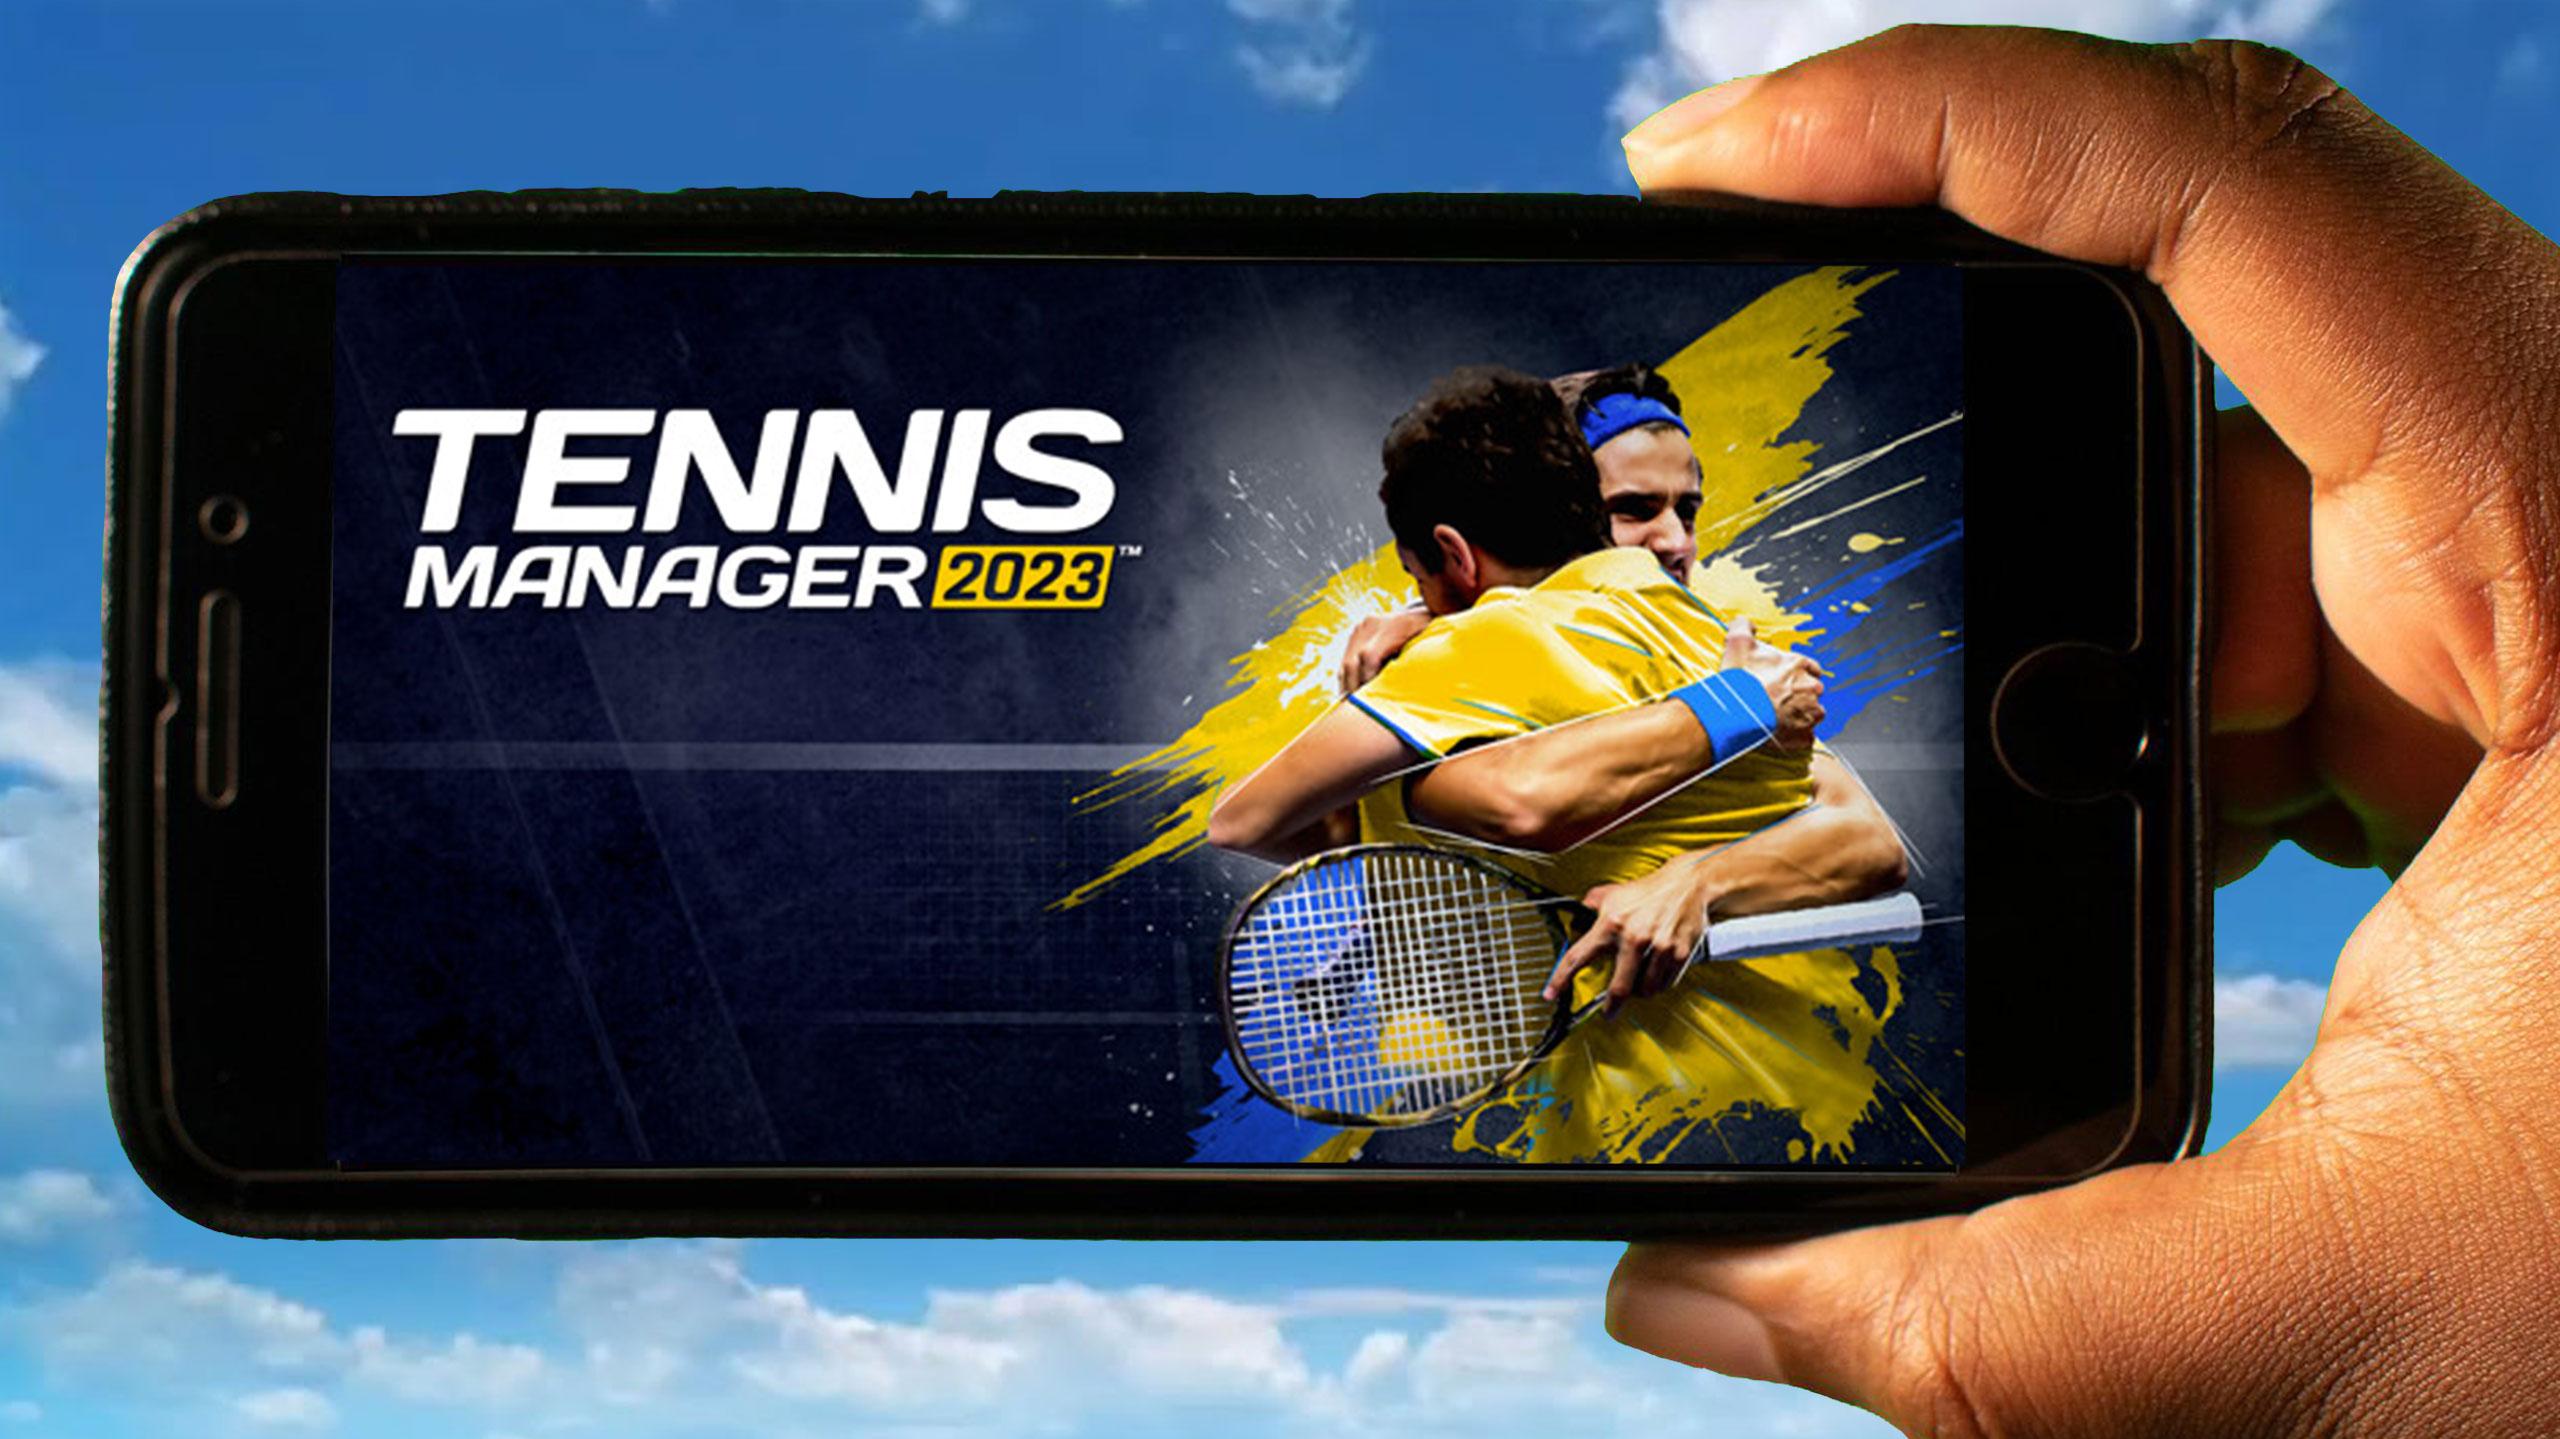 Tennis Manager 2023 Mobile   How to play on an Android or iOS